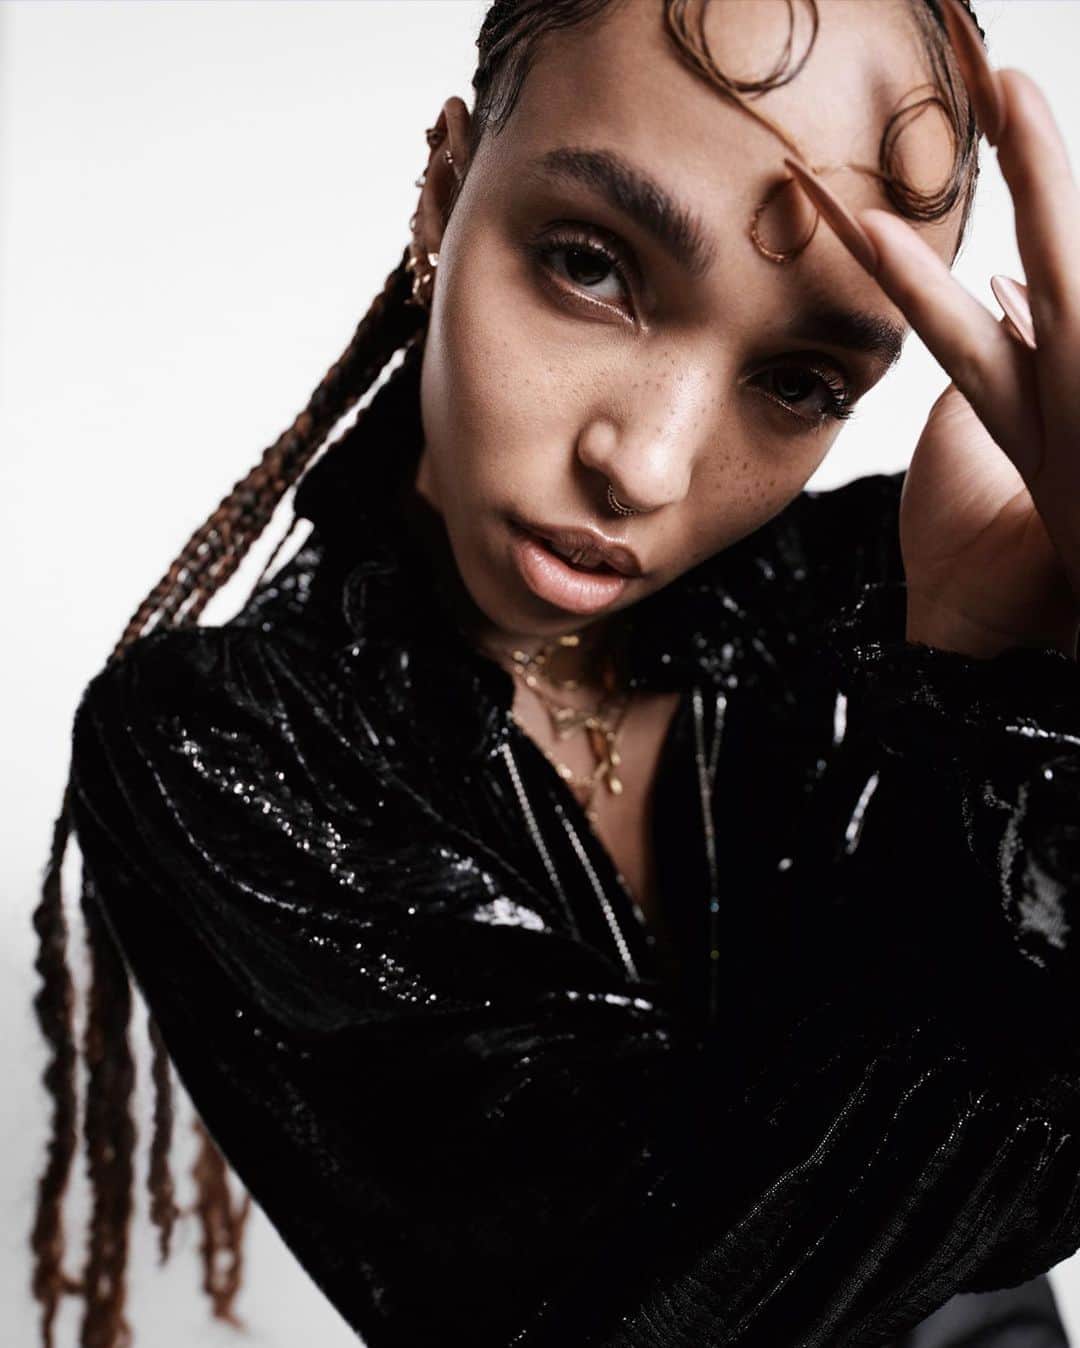 i-Dさんのインスタグラム写真 - (i-DInstagram)「Exactly one year since we unveiled @FKATwigs incredible cover shoot for i-D. ✨⁣⁣⁣ ⁣ Revisit the shoot in full and read her track-by-track breakdown of her masterful album 'Magdalene' via link in bio.⁣ ⁣ (Still not over how hard she snapped tbh 🥵) ⁣⁣ ⁣ [The Post Truth Truth Issue, no. 357, Autumn 2019.]⁣⁣⁣ .⁣⁣⁣⁣ .⁣⁣⁣⁣ .⁣⁣⁣⁣ Text @frankie__dunn⁣⁣⁣⁣ Photography @willyvanderperre⁣⁣⁣⁣ Styling @alastairmckimm⁣⁣⁣⁣ Editor-in-Chief @alastairmckimm⁣⁣⁣⁣ Creative Director @lauragenninger」9月2日 20時08分 - i_d